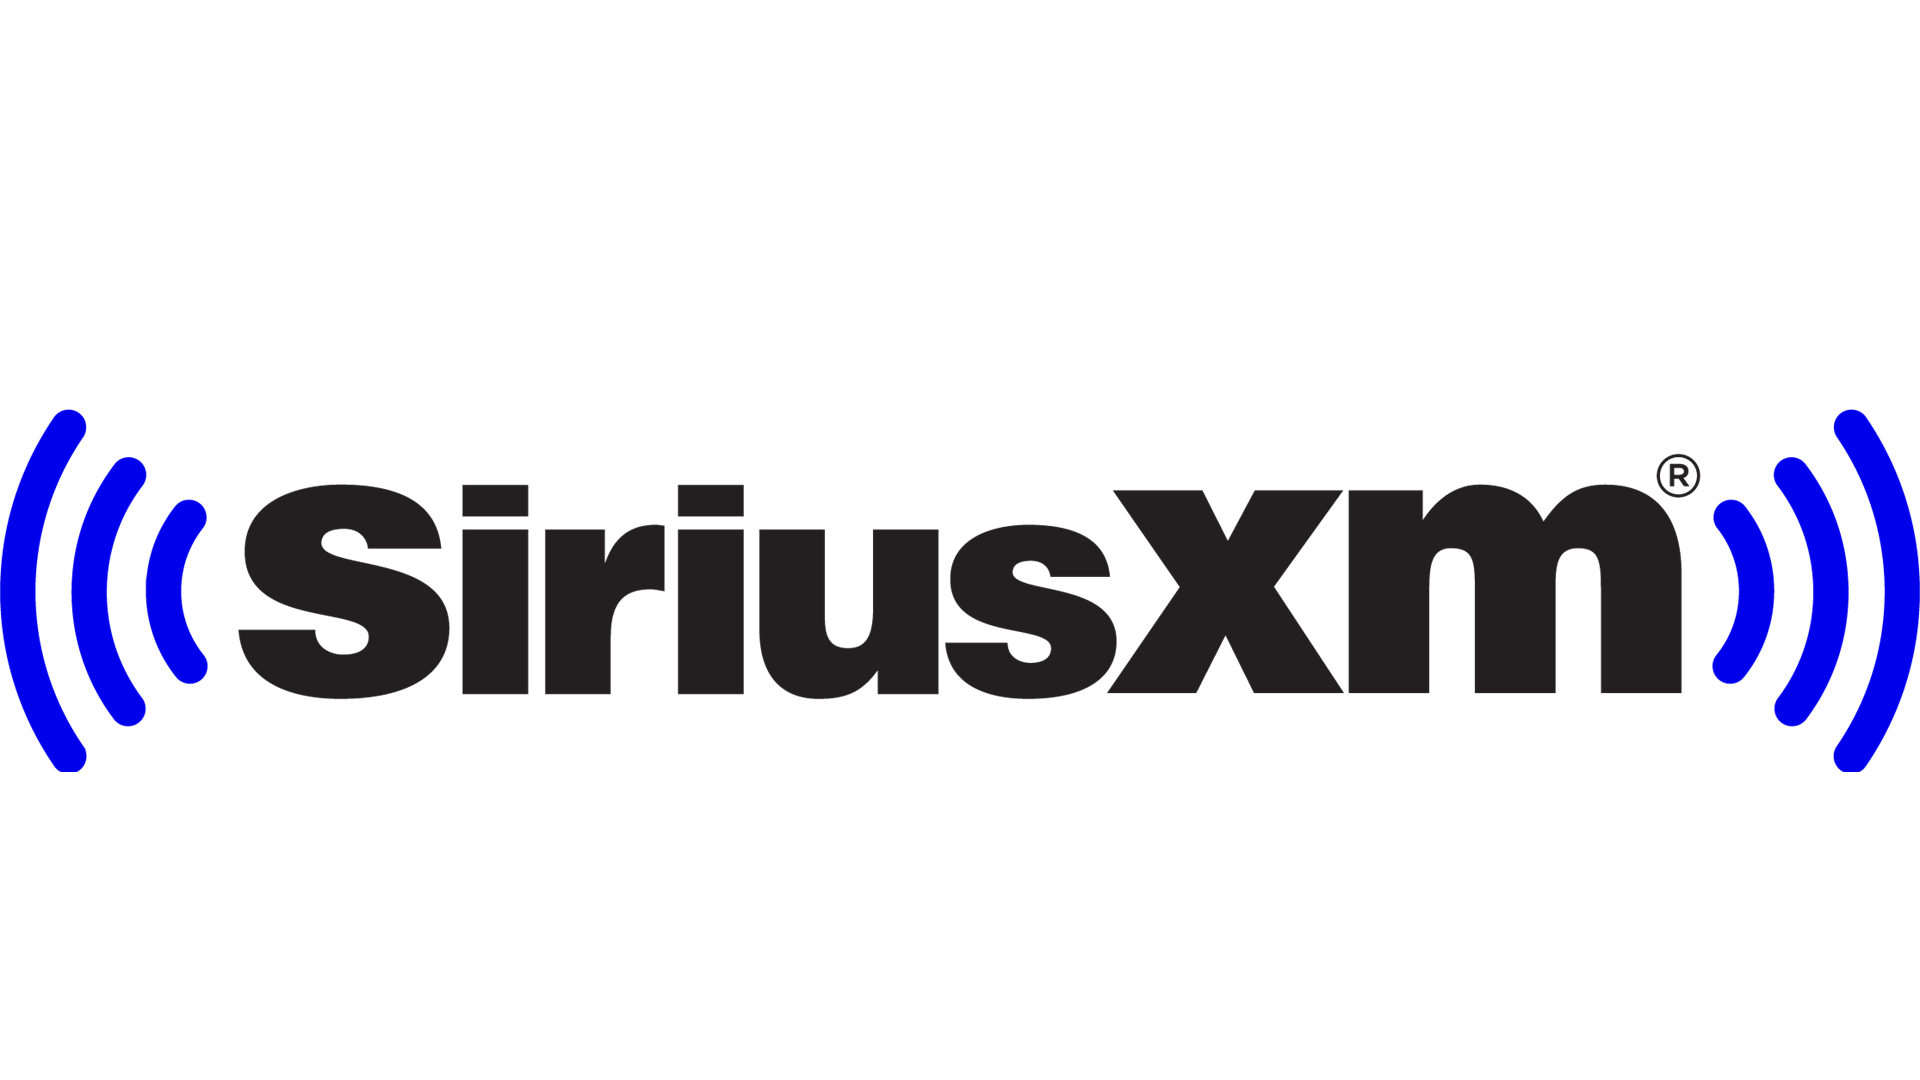 Siriusxm $5 a Month For 12 Months